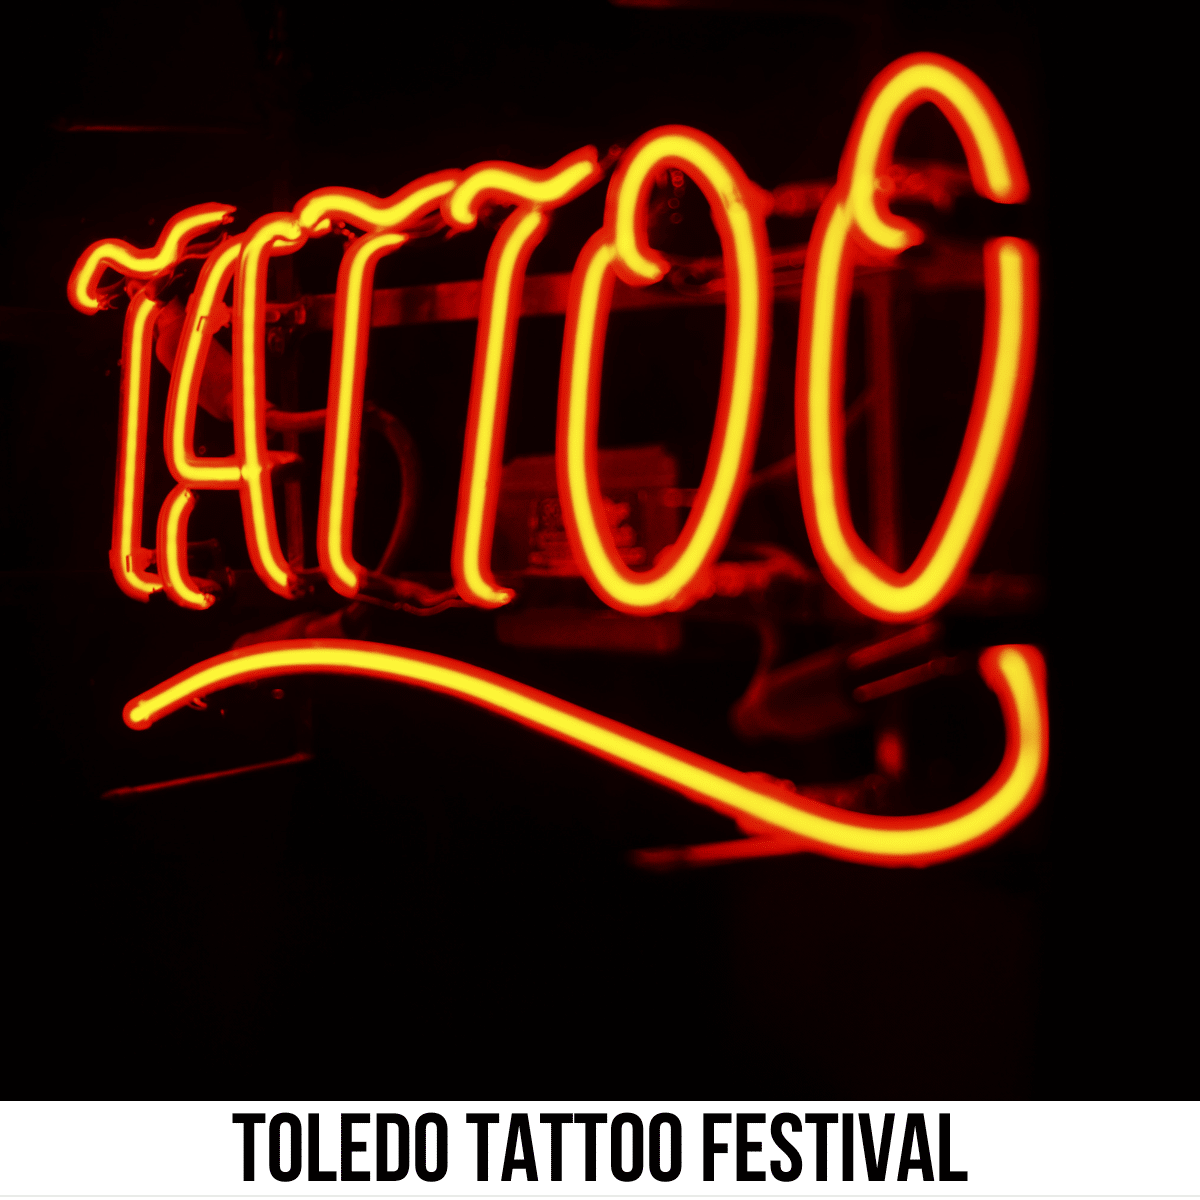 A square image of a photo of a neon sign that says TATTOO on a dark background. A white strip across the bottom has text Toledo Tattoo Festival.